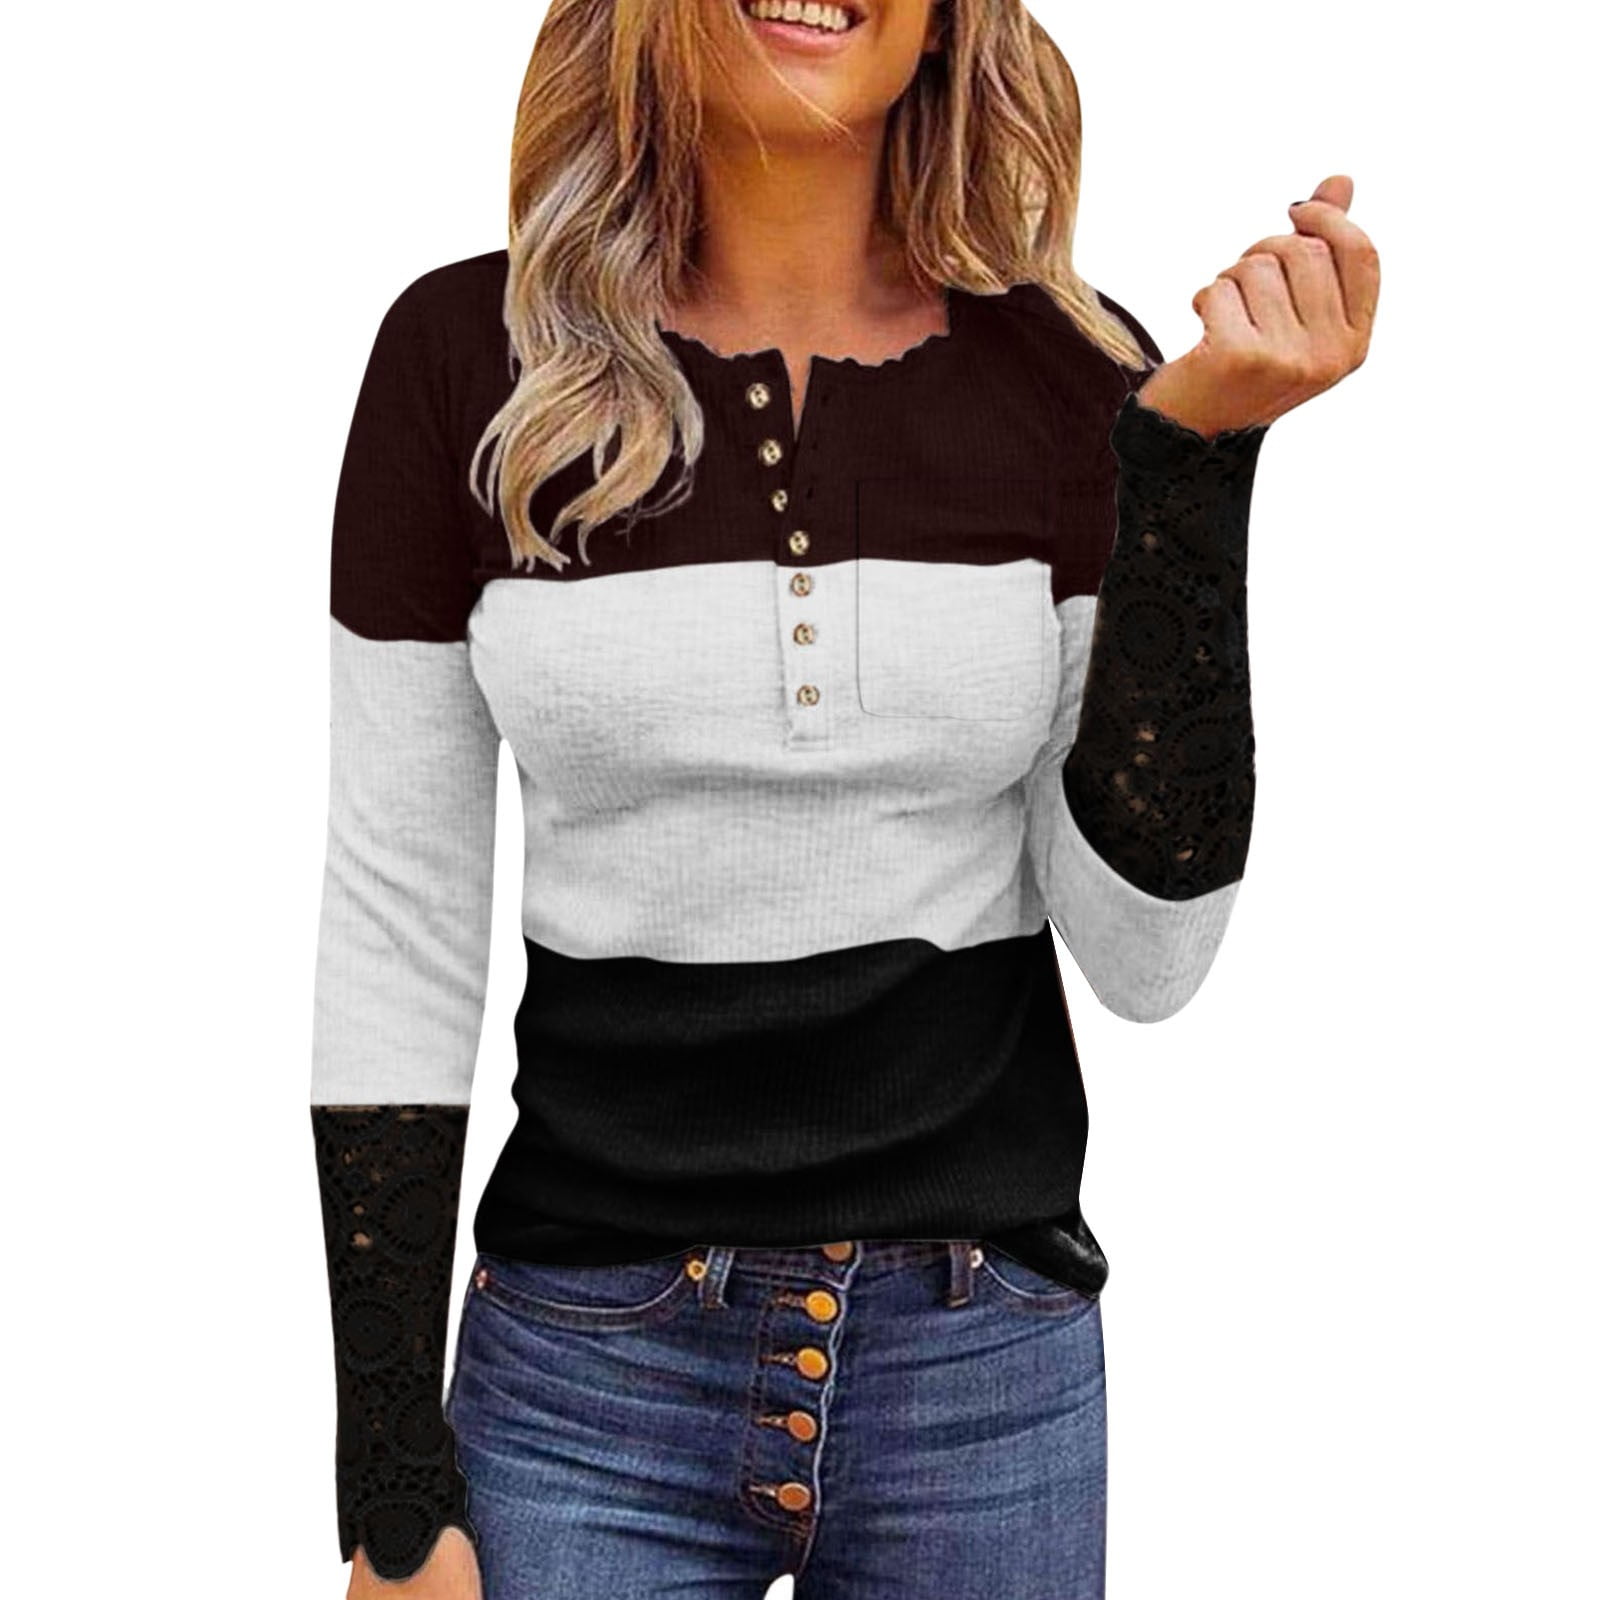 vbnergoie Womens Long Sleeve Tops Lace V Neck Button Down Henley Shirts  Blouses With Pocket White Long Sleeve Shirt Women Sport Black Tees for Women  